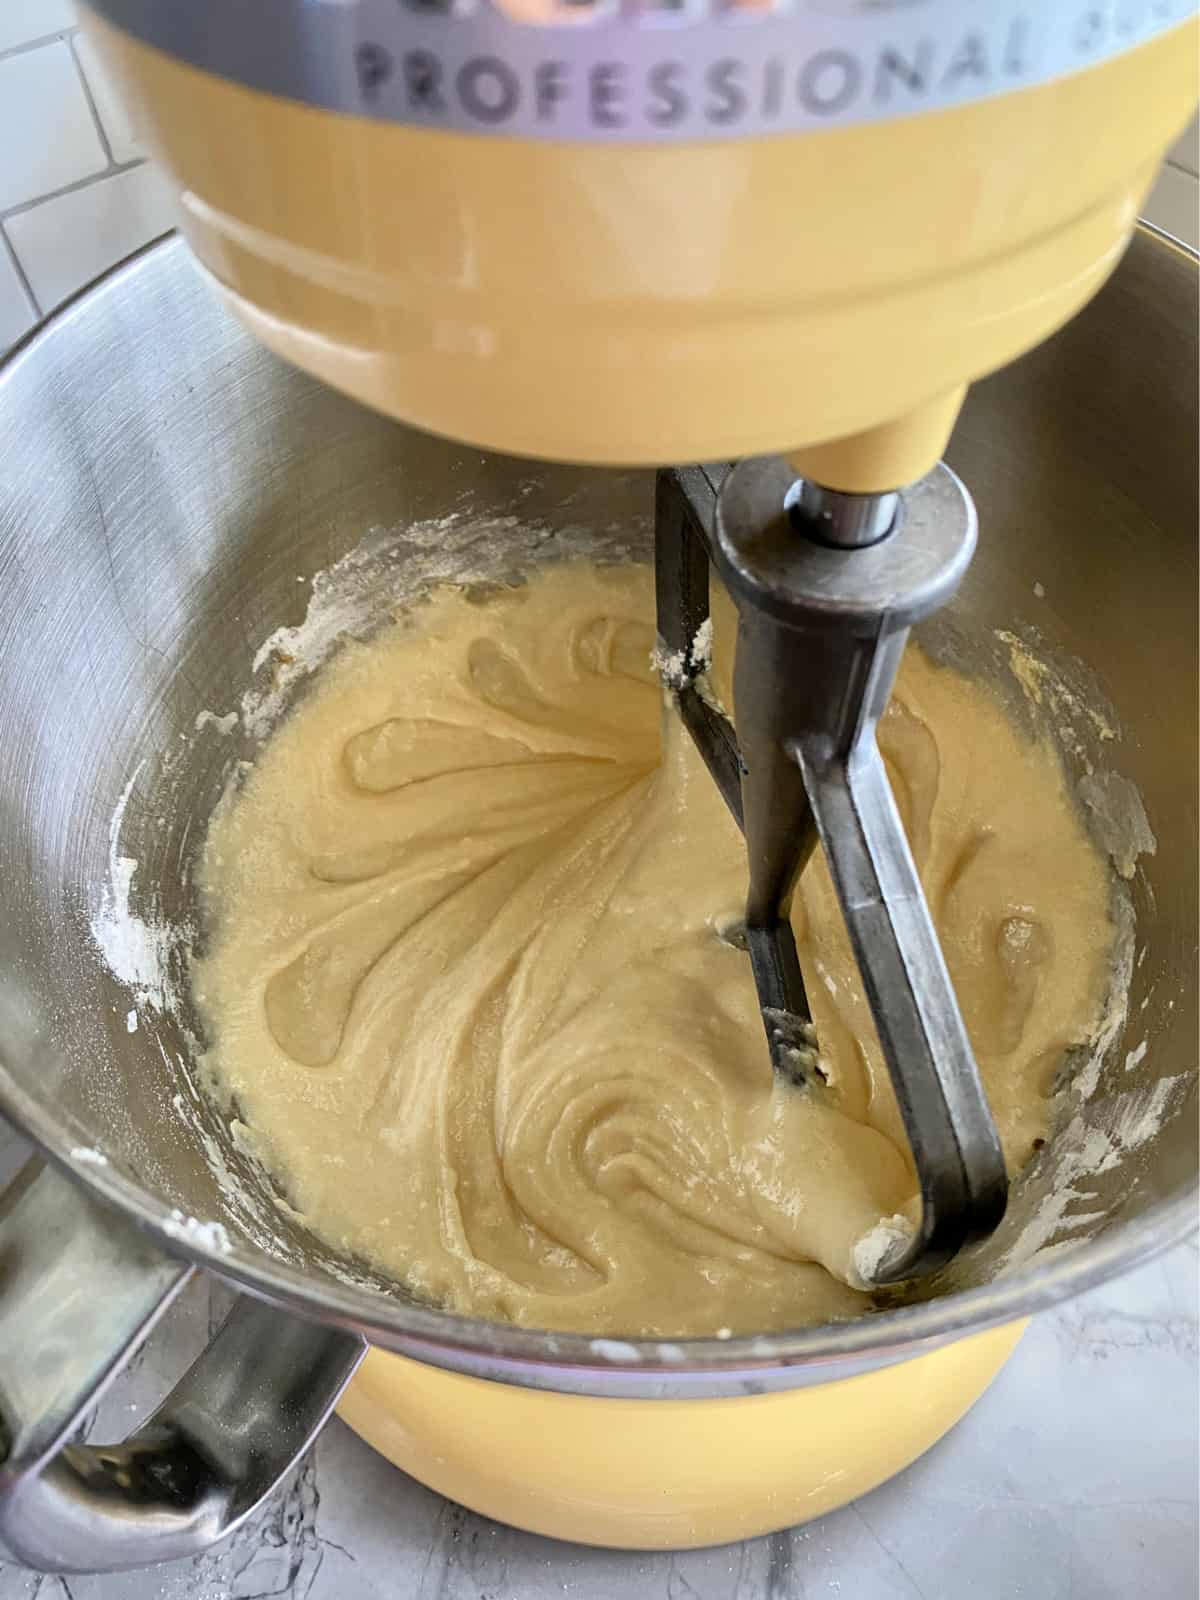 Top view of whipped batter in a KitchenAid Stand Mixer bowl with a paddle attachment.